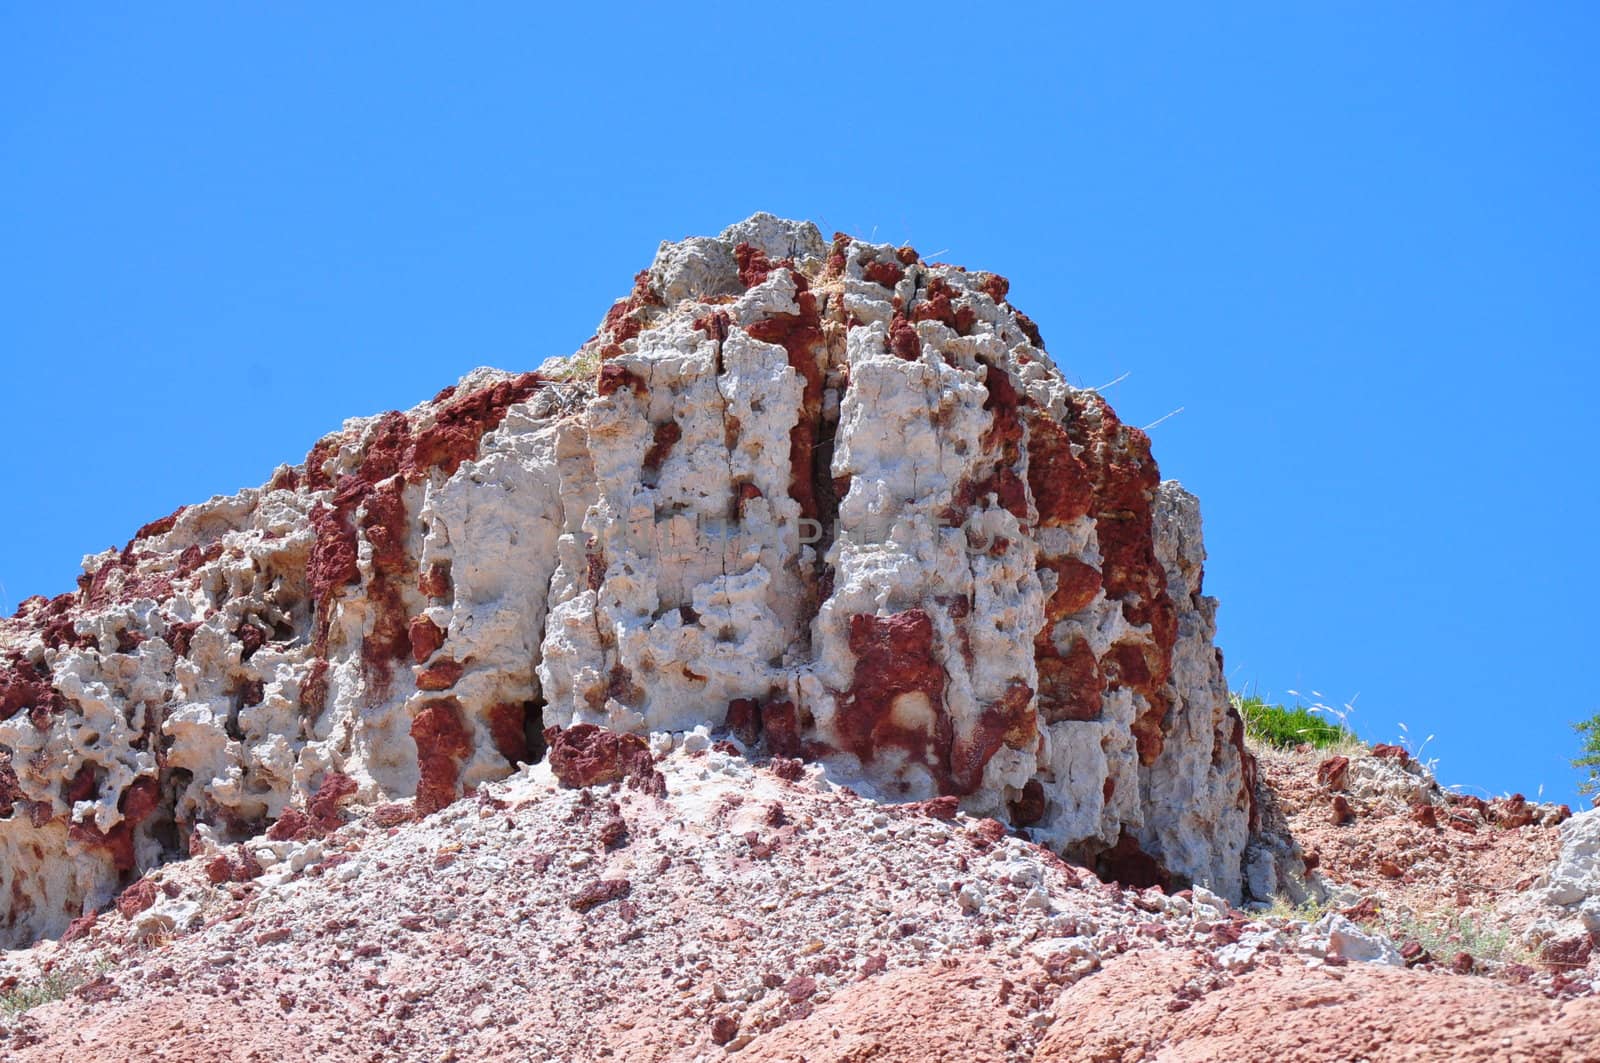 Amazing Rock formation in the Hallett Cove Conservation Park, South Australia. by dimkadimon